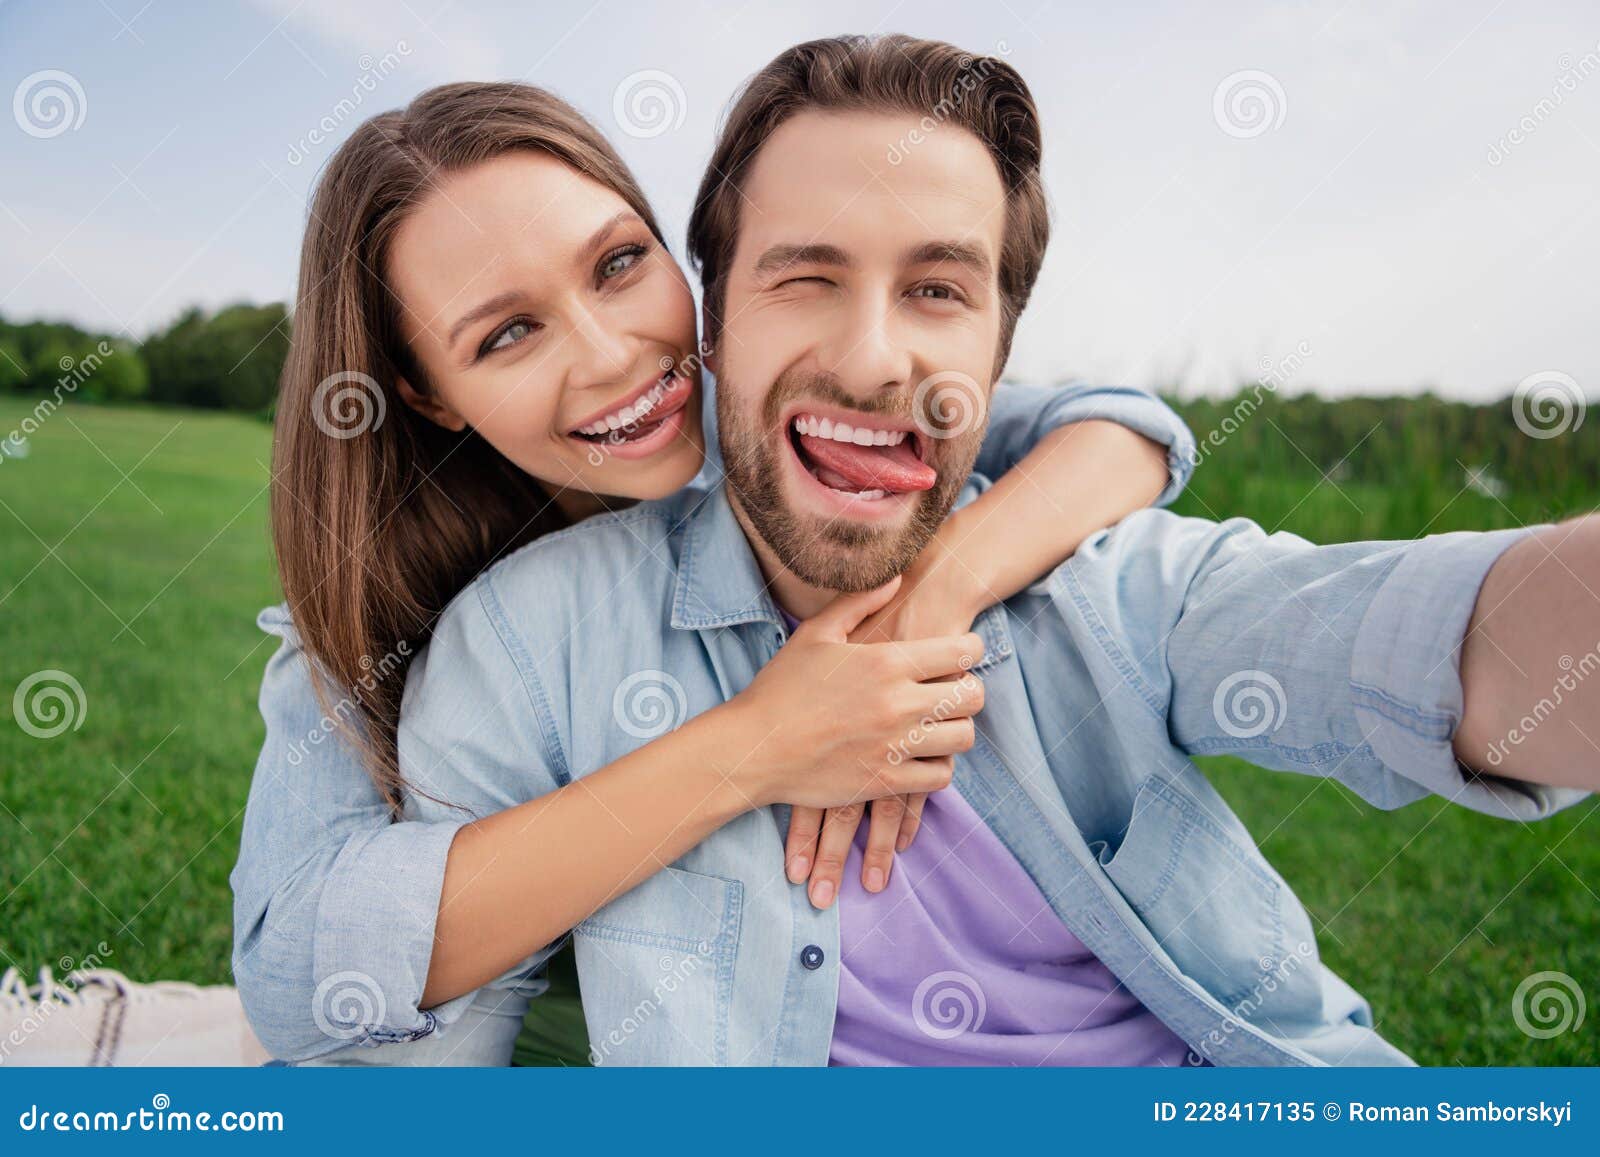 Photo Of Funky Funny Smiling Couple Take Selfie Fooling Around Show